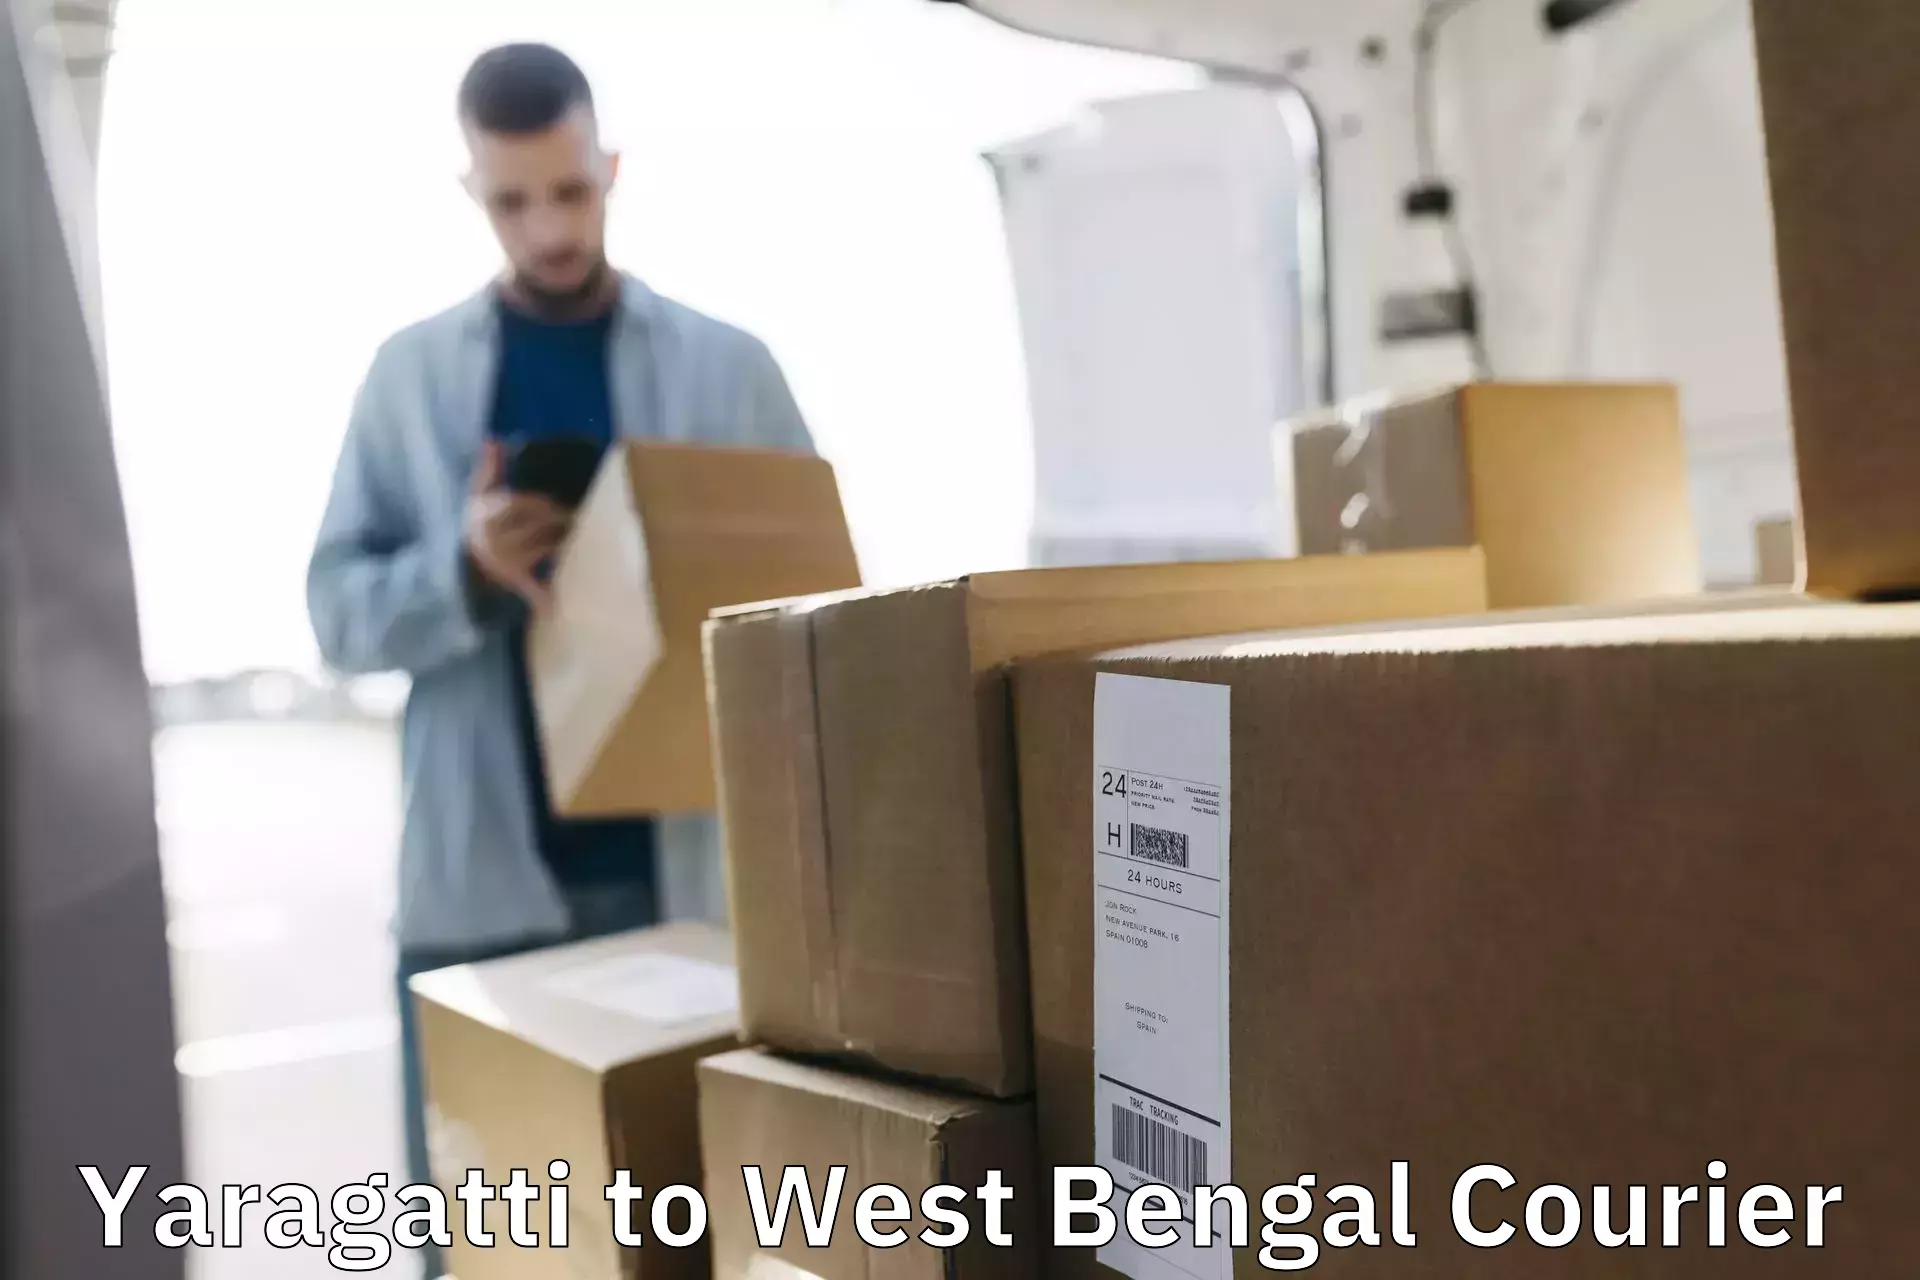 Full-service courier options Yaragatti to Hooghly